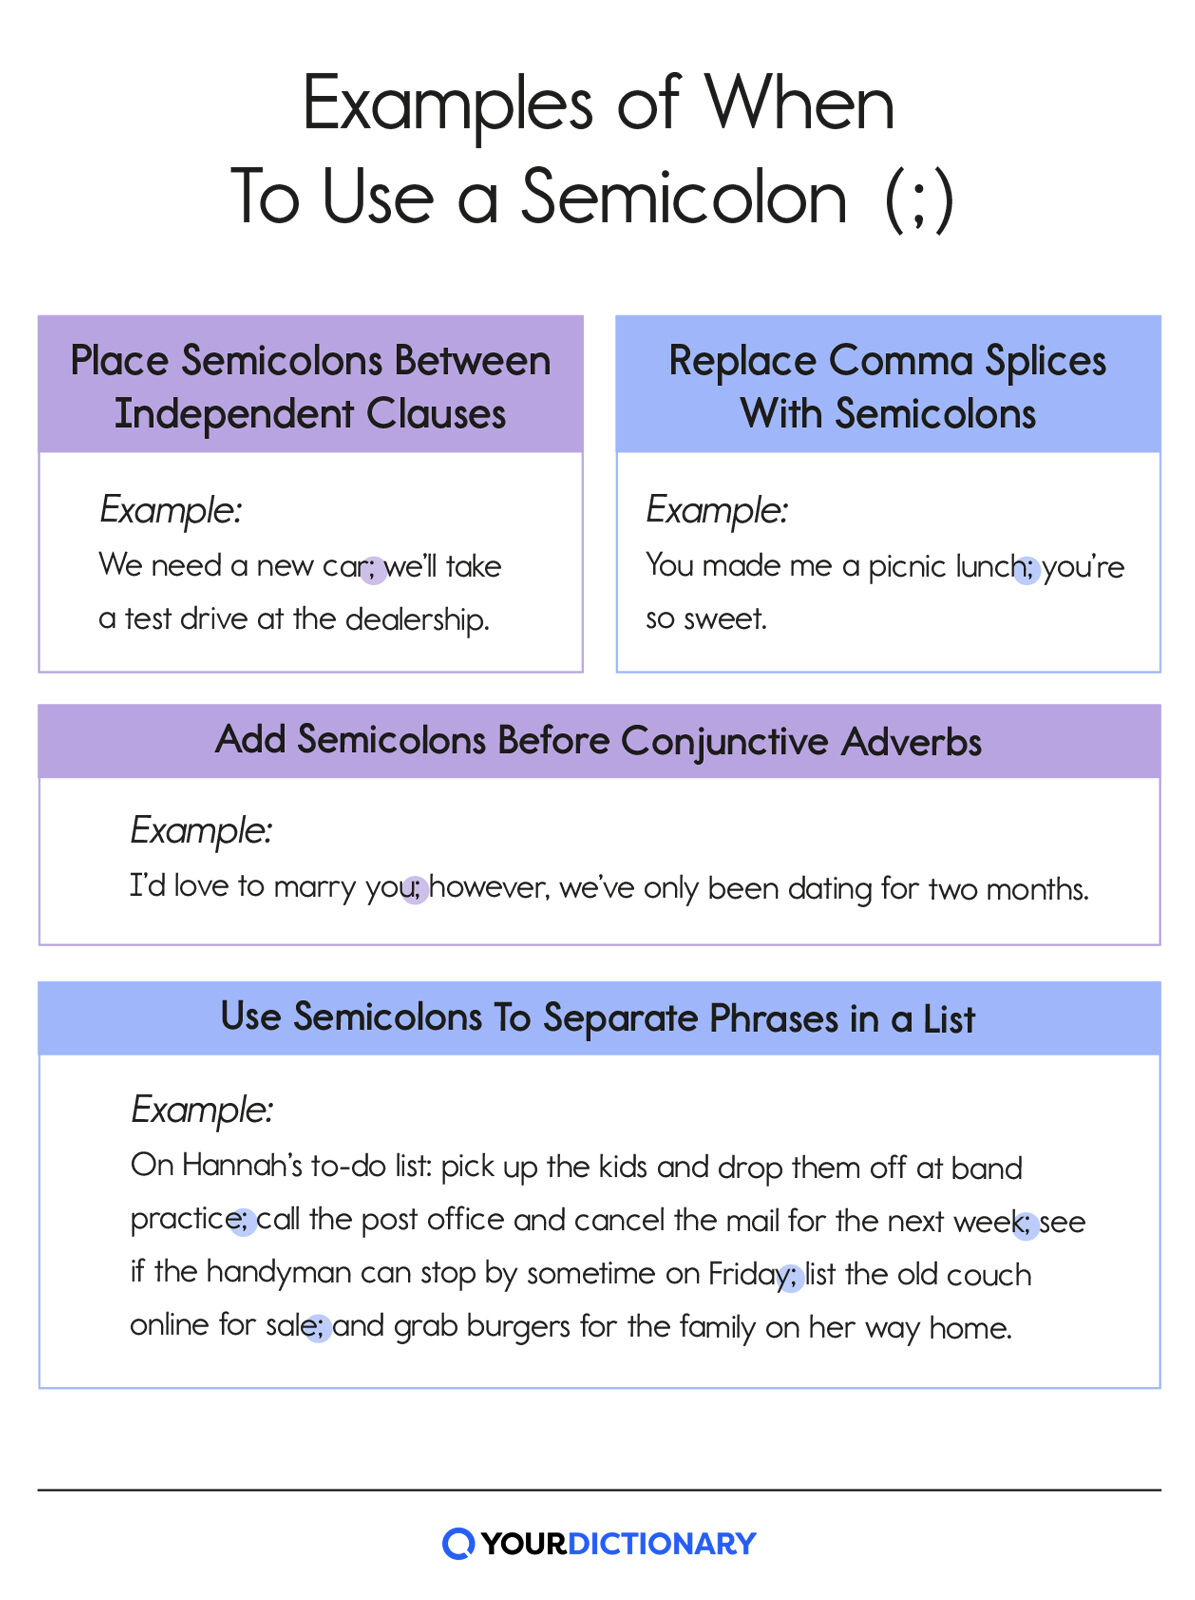 rules for when to use semicolons with examples from the article